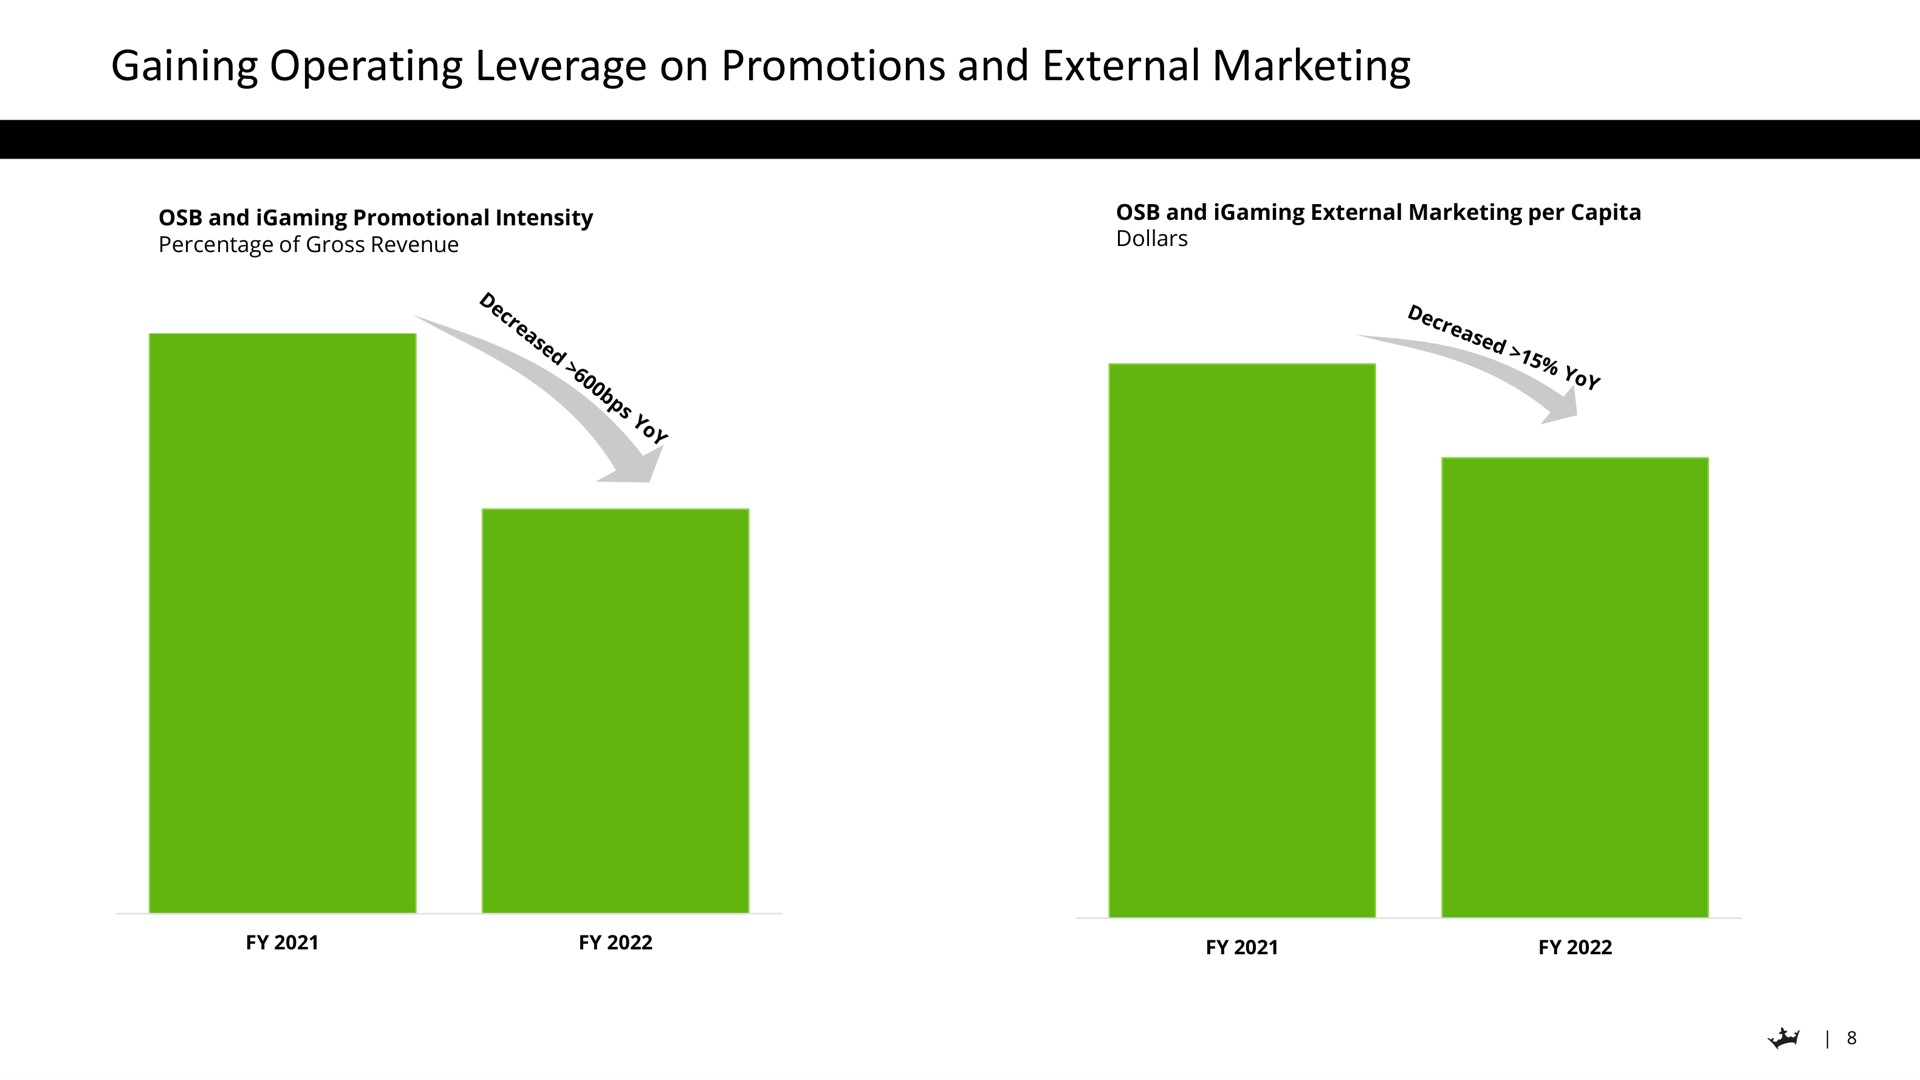 gaining operating leverage on promotions and external marketing | DraftKings